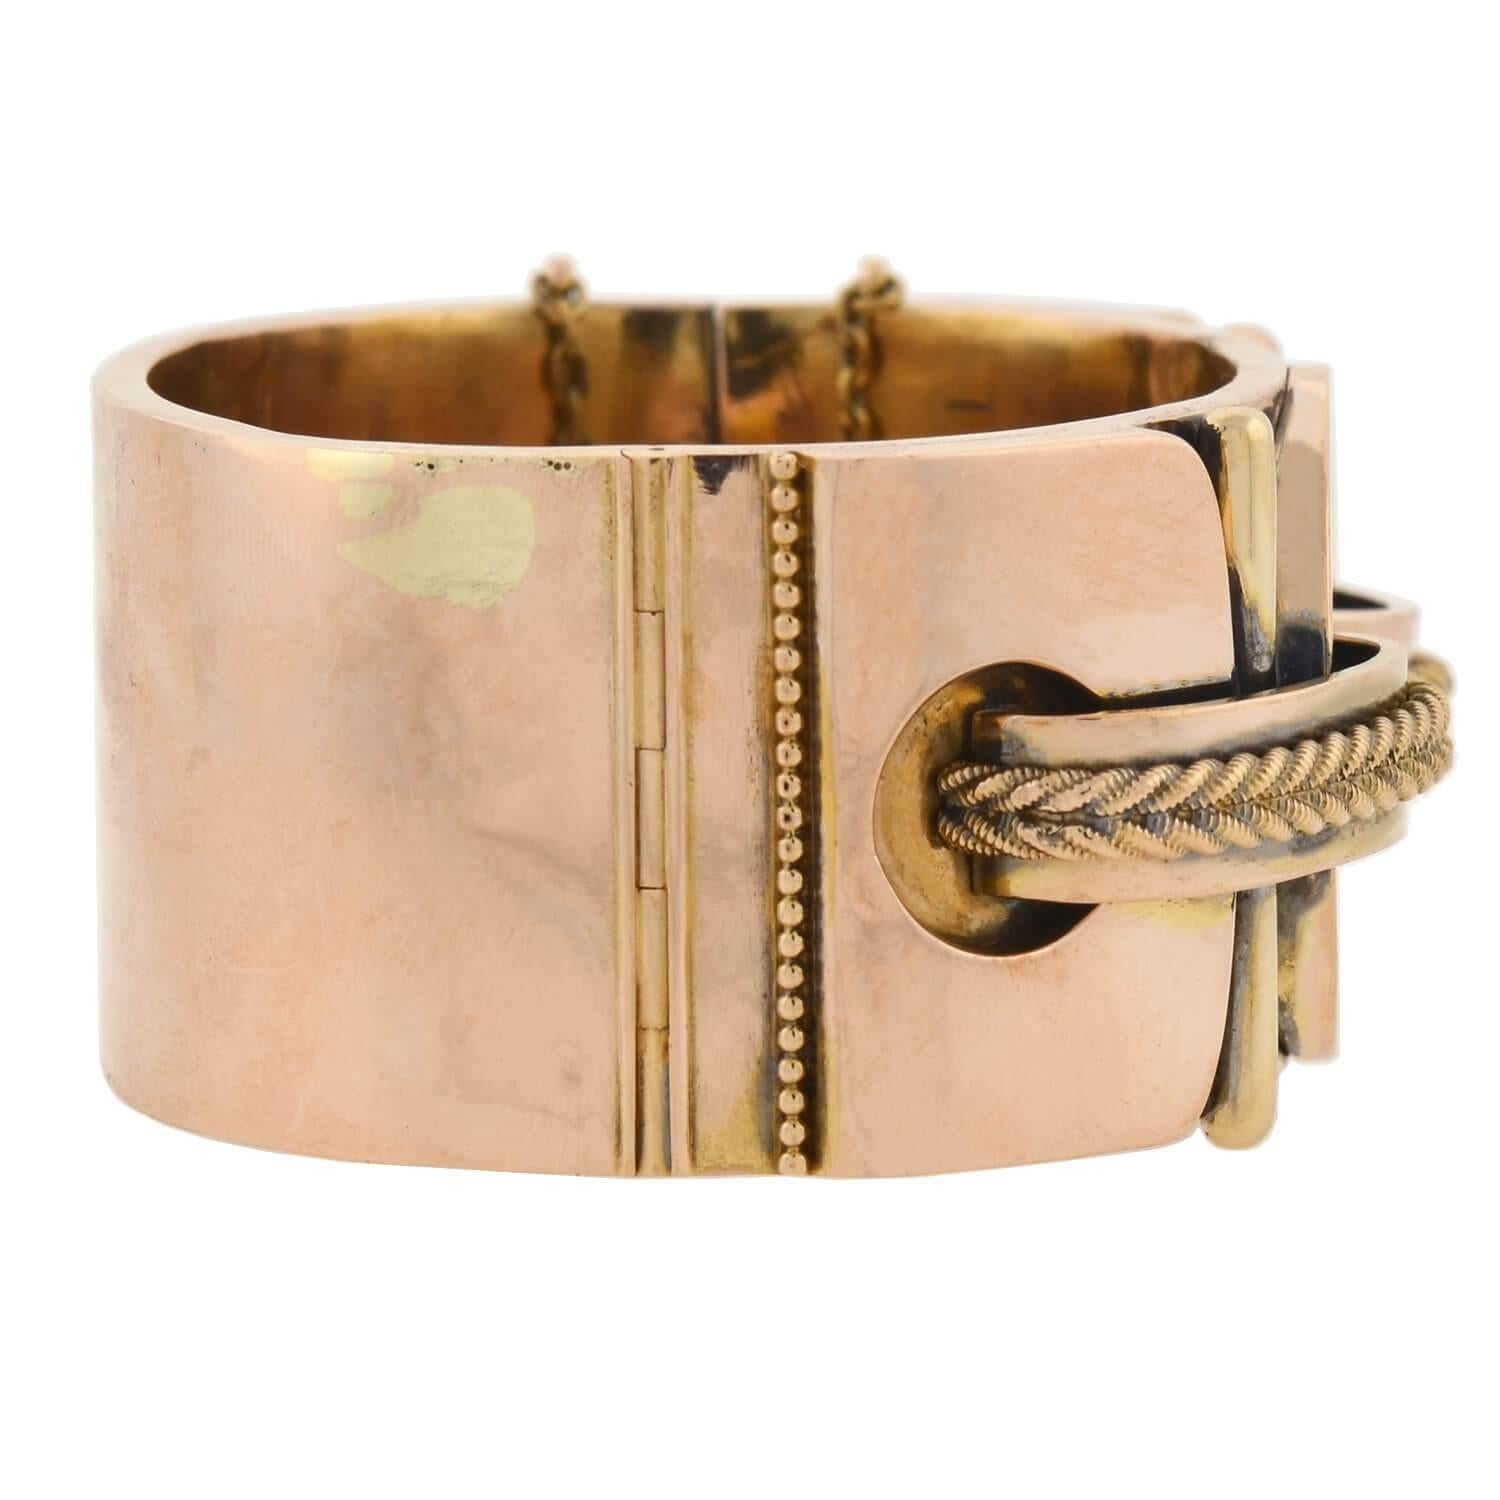 An incredible gold bracelet from the Victorian (ca1880) era! This wide, three-dimensional bangle is crafted in vivid 15kt rose gold (indicating its English origin) and has a fabulous double buckle design. The elaborate design rests across the front